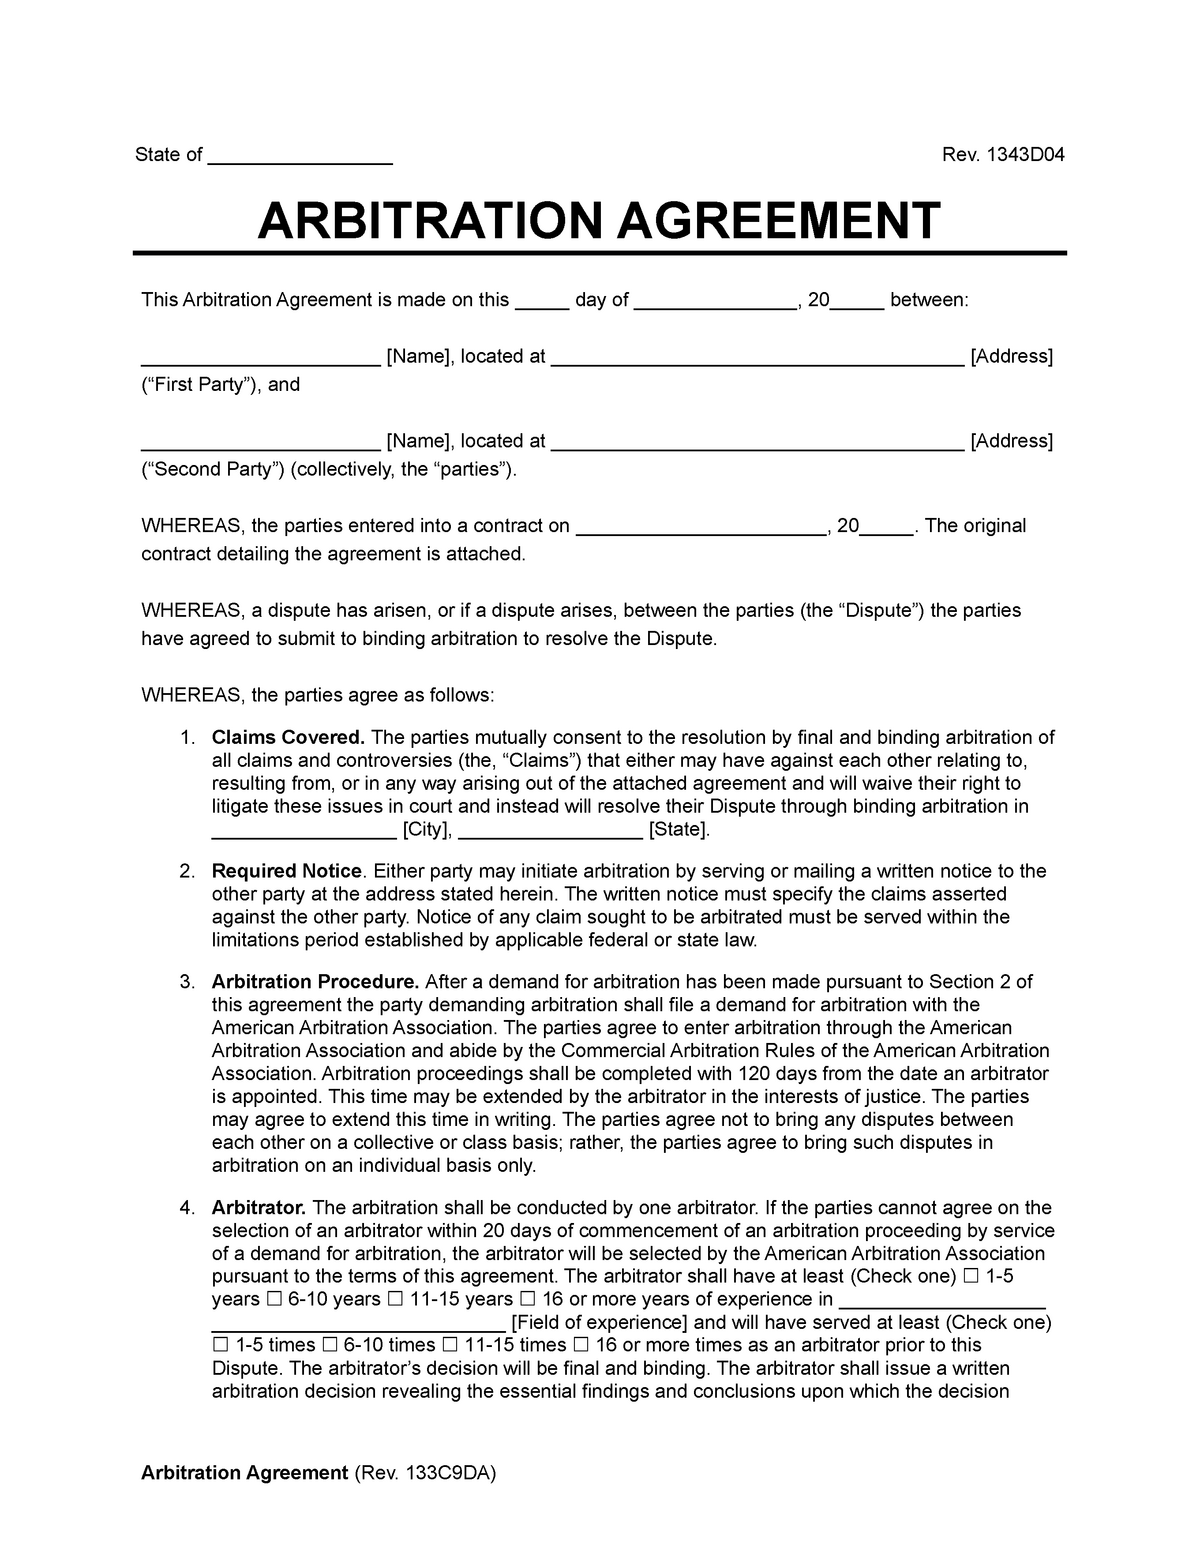 arbitration agreement template